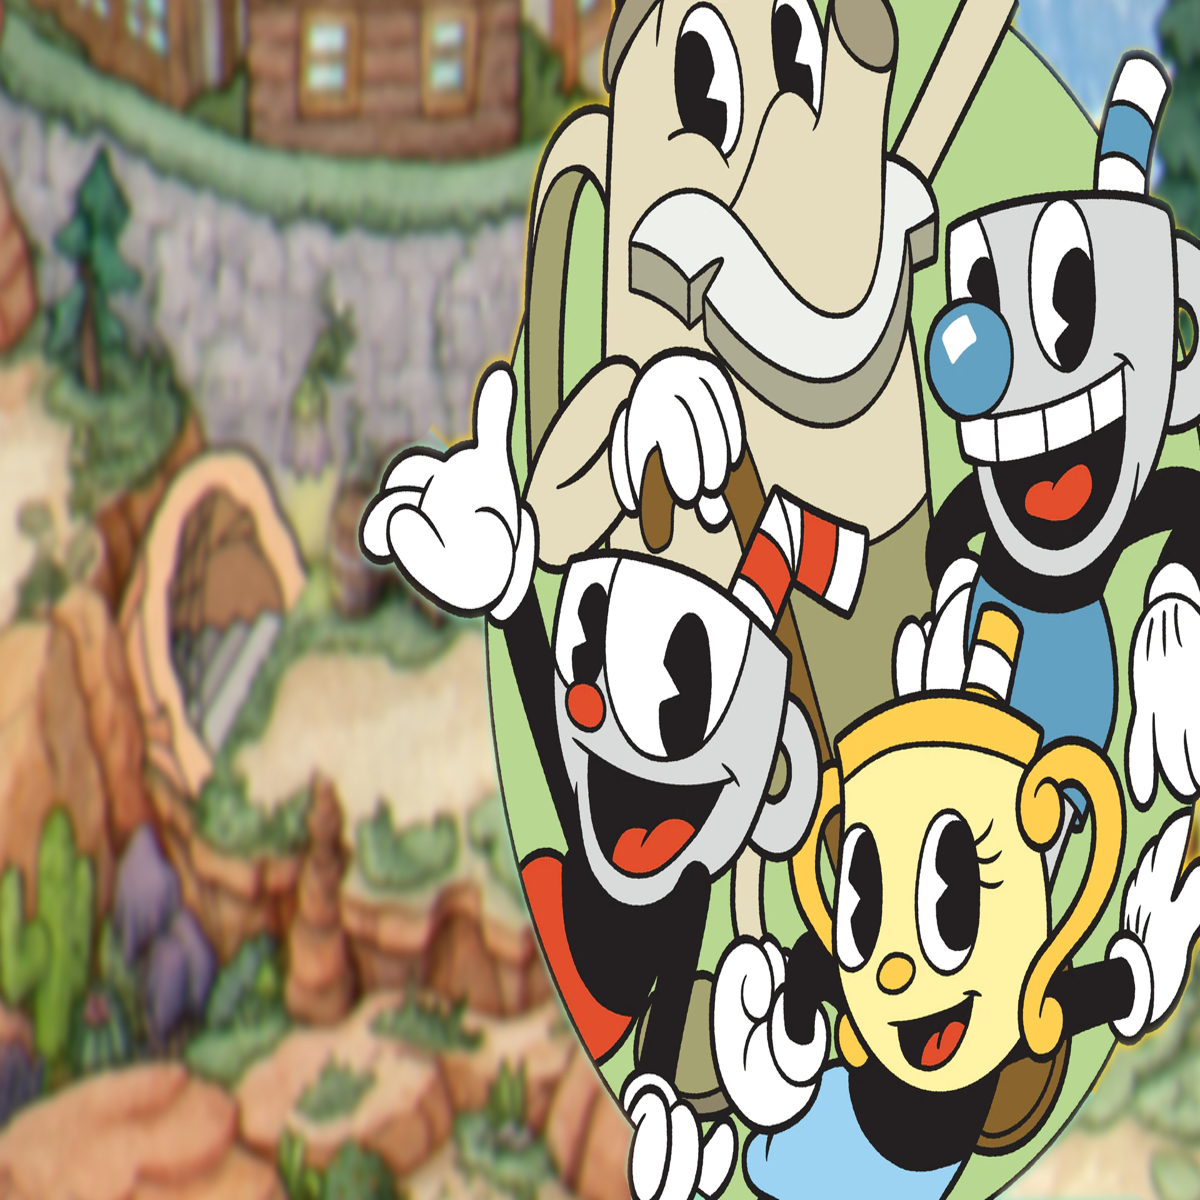 The Cuphead Show: 3 Ways It's Better Than The Game (& 3 It's Worse)